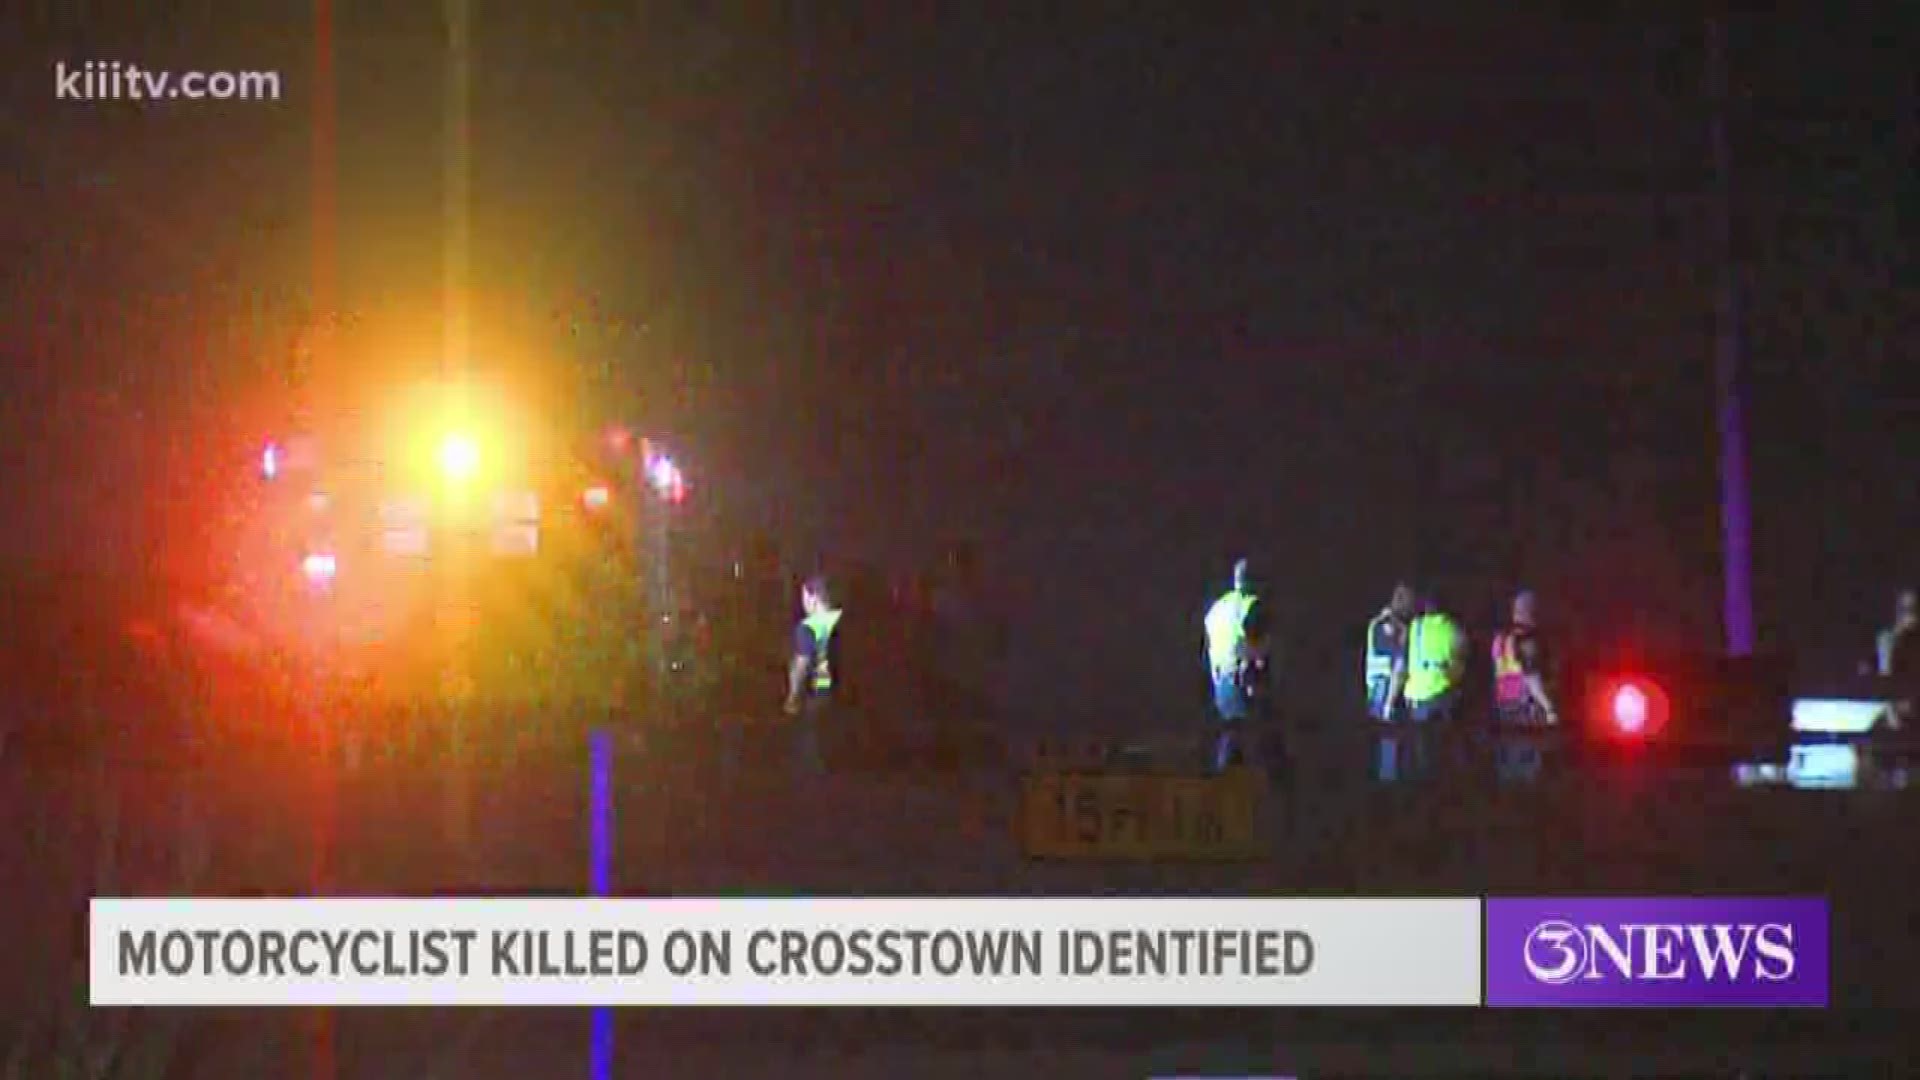 A motorcyclist who was killed in an accident in Corpus Christi, Texas, over the weekend has been identified by the Nueces County Medical Examiner's Office.